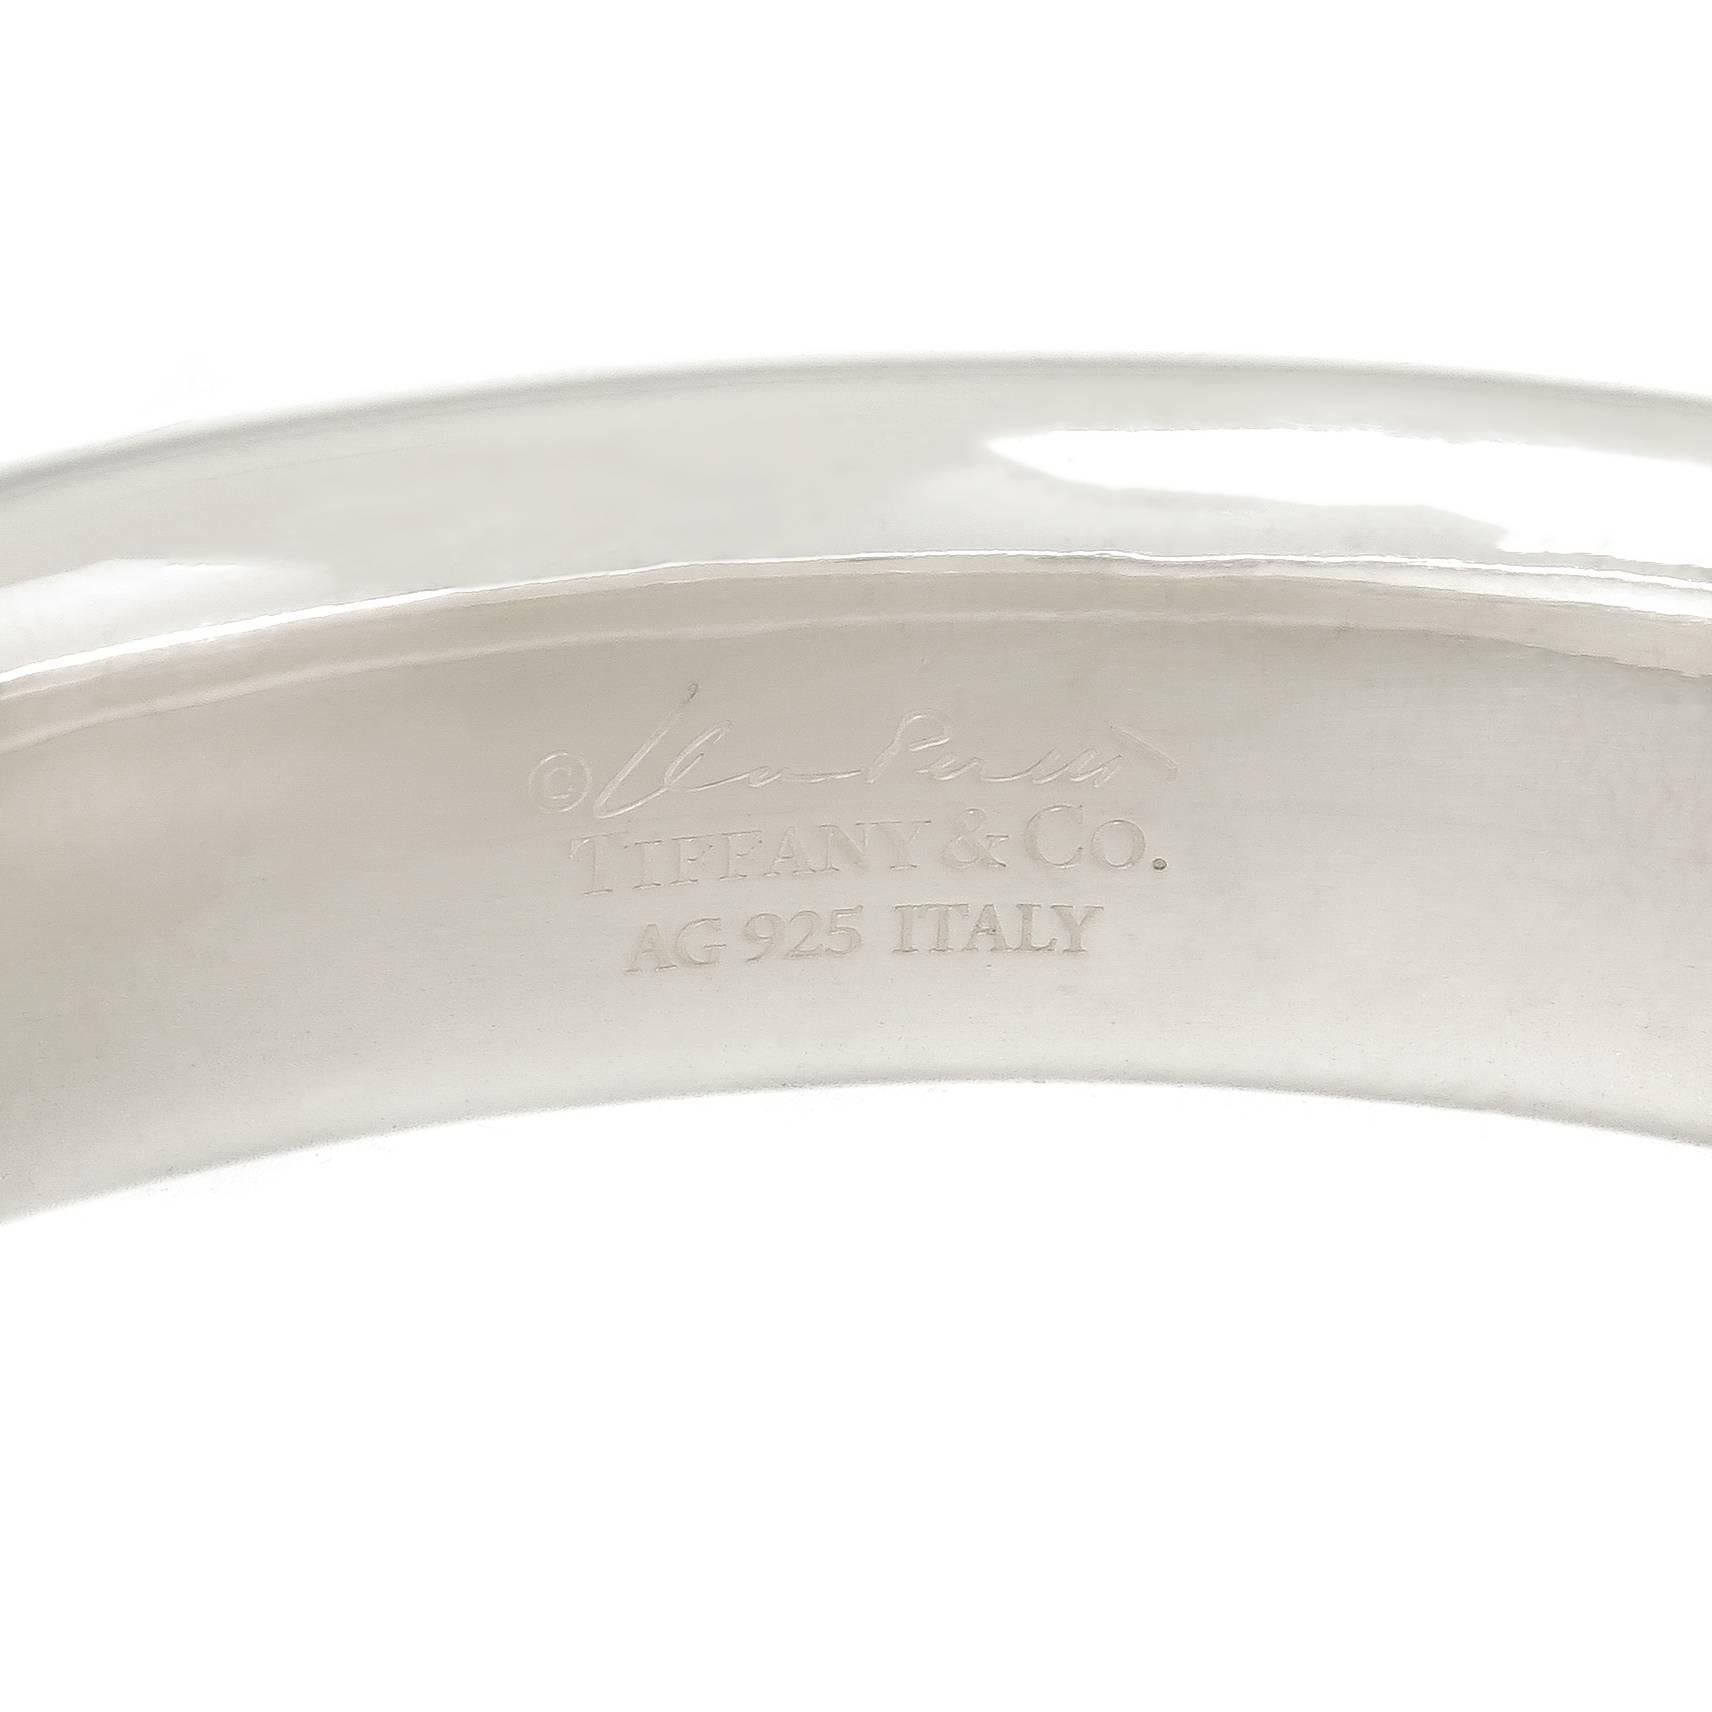 Circa 2012 Elsa Peretti For Tiffany & Co. Sterling Silver round Bangle Bracelet, measuring 5/8 inch wide, 1/4 inch thick and has an inside wrist measurement of 7 1/4 inch. Excellent condition and comes in a Tiffany felt pouch.